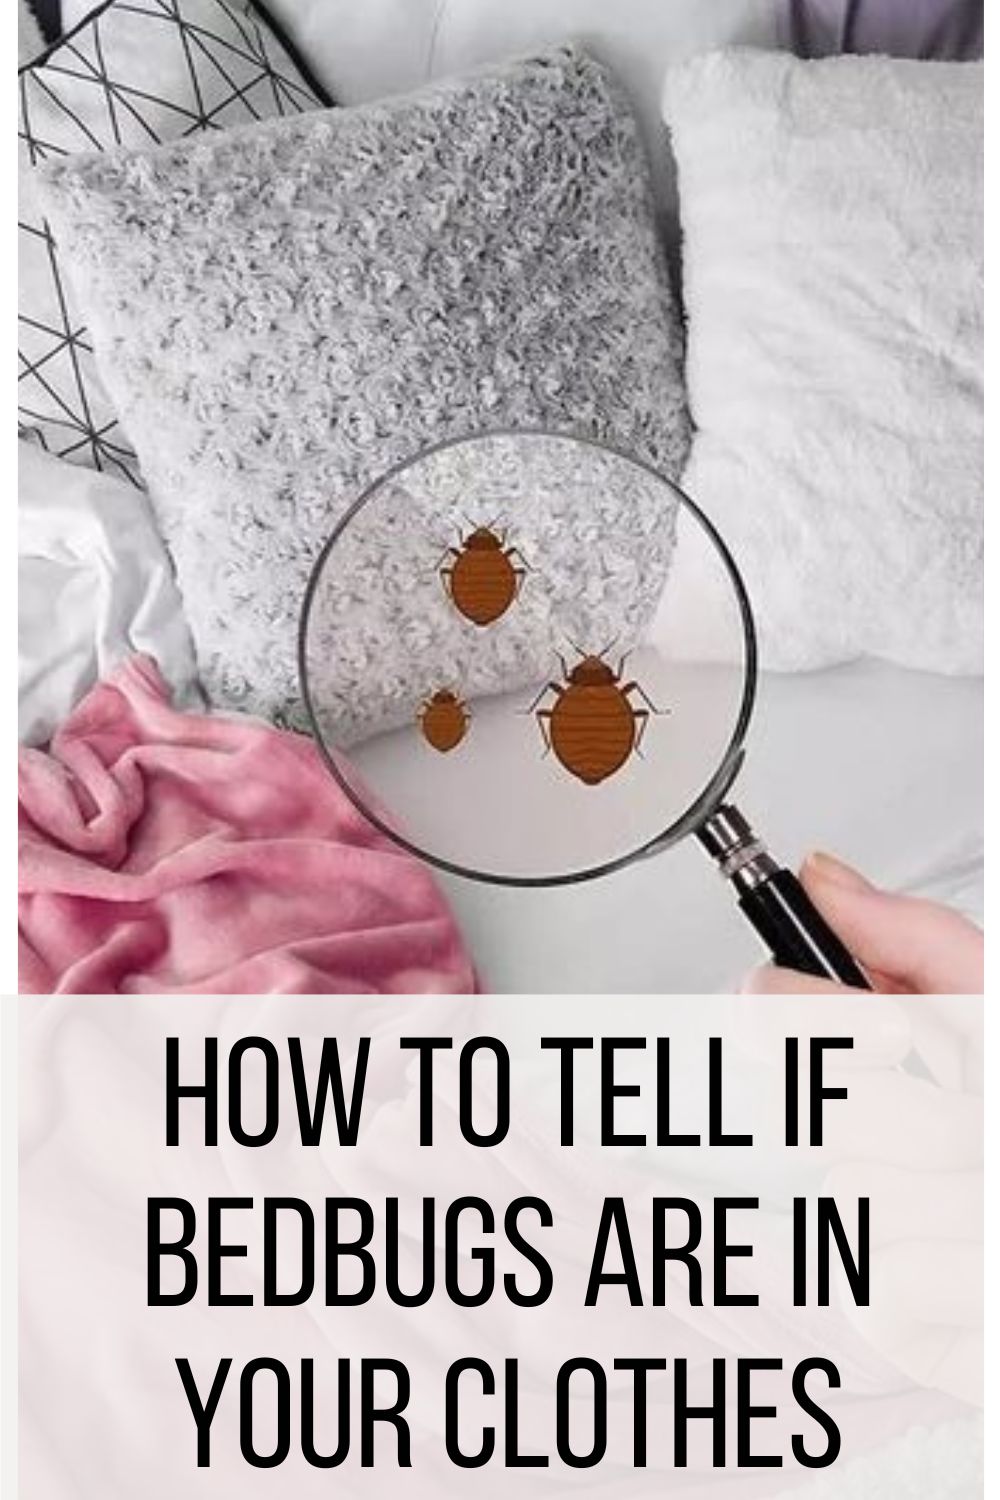 How to Tell If Bedbugs are in Your Clothes